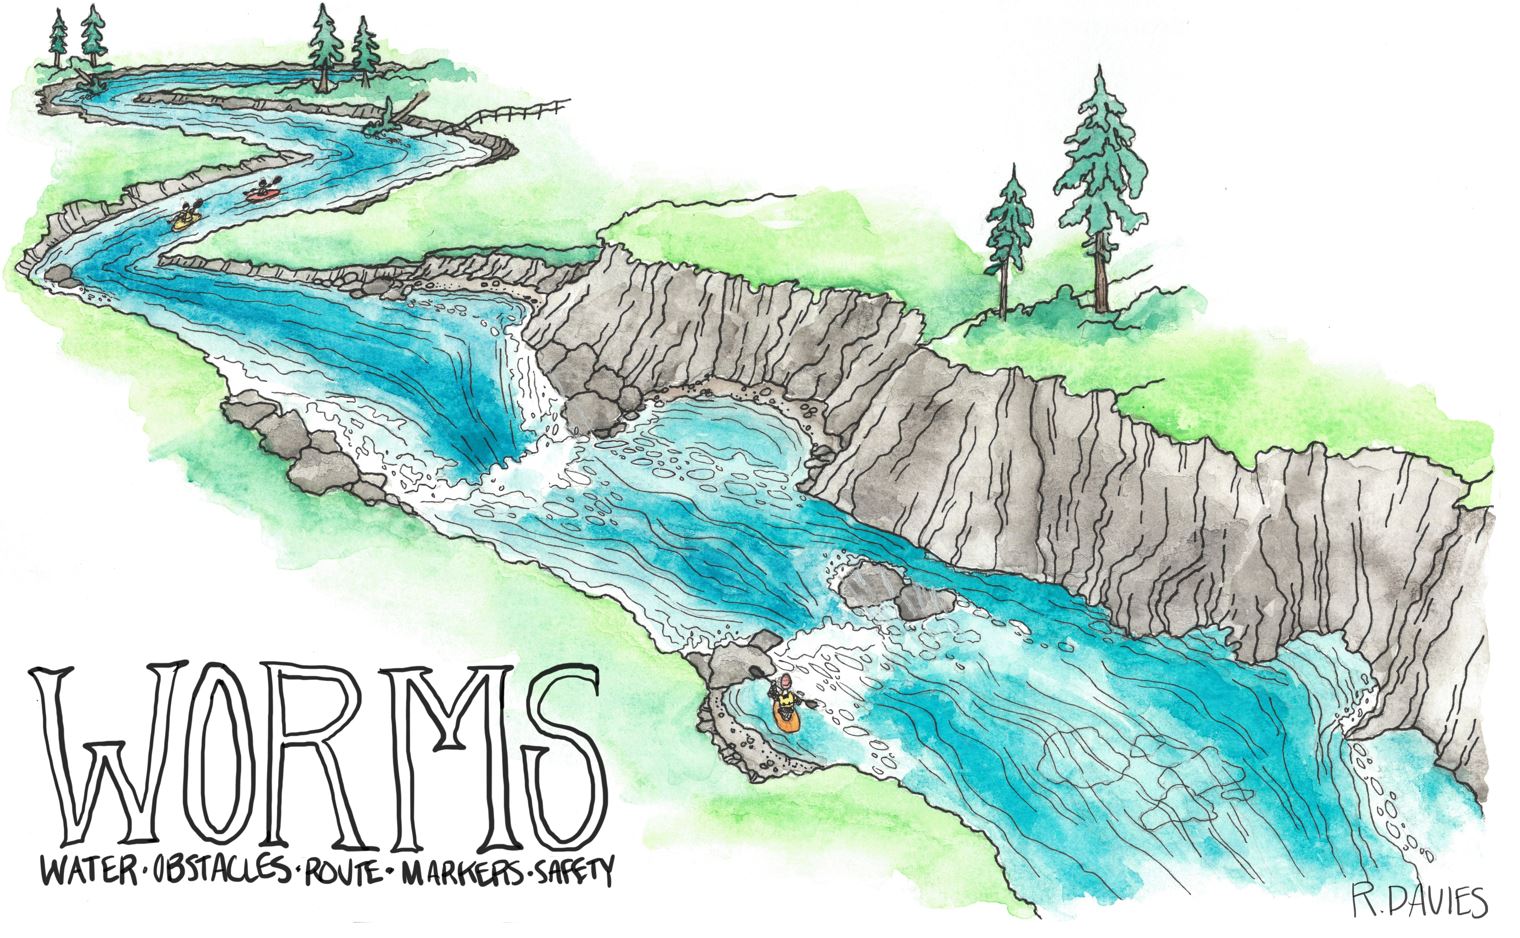 Reading Rivers with W.O.R.M.S.